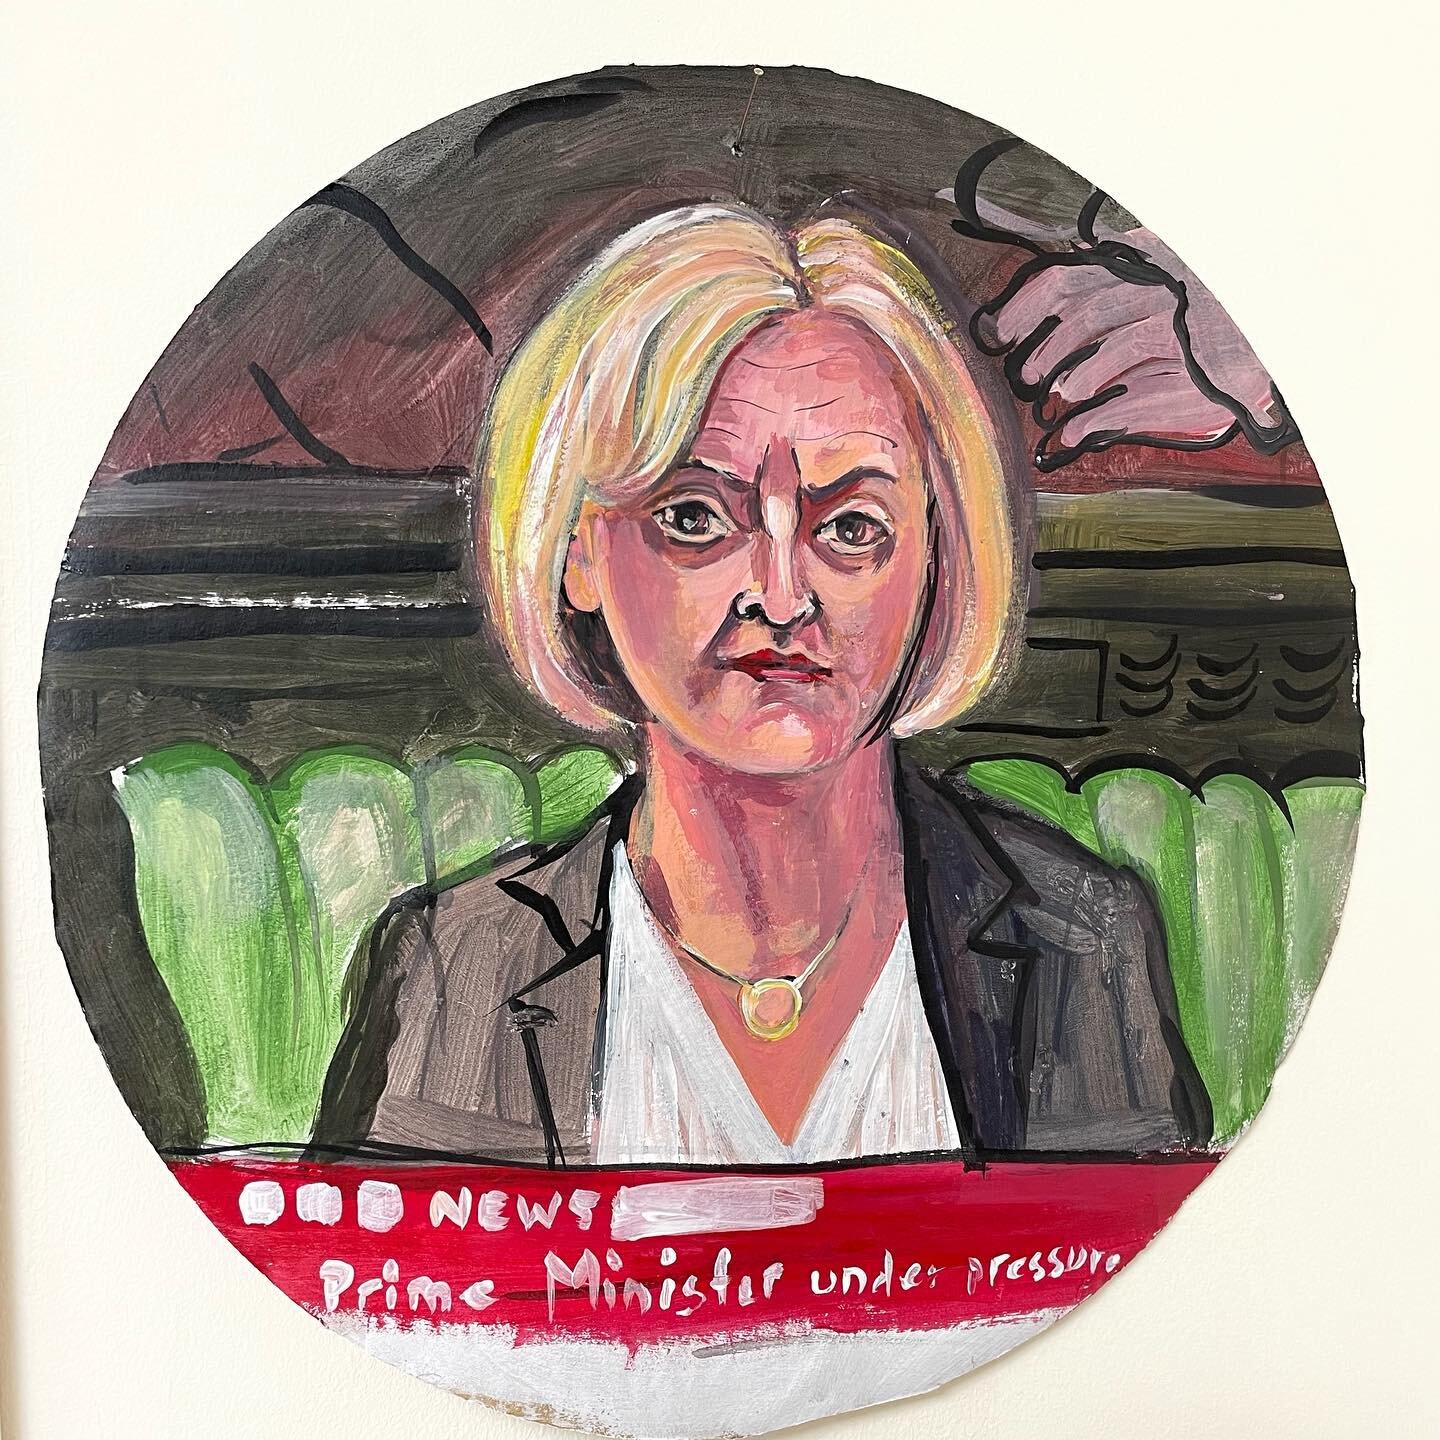 She&rsquo;s back in the news!! #liztruss Forgot I made a quick sketch on an old pizza base from the collection of them during lockdown .. painted the day she stepped down live on the TV. Didn&rsquo;t even have time to finish it!! 

.⁣
.⁣
.⁣
.⁣
#fastf